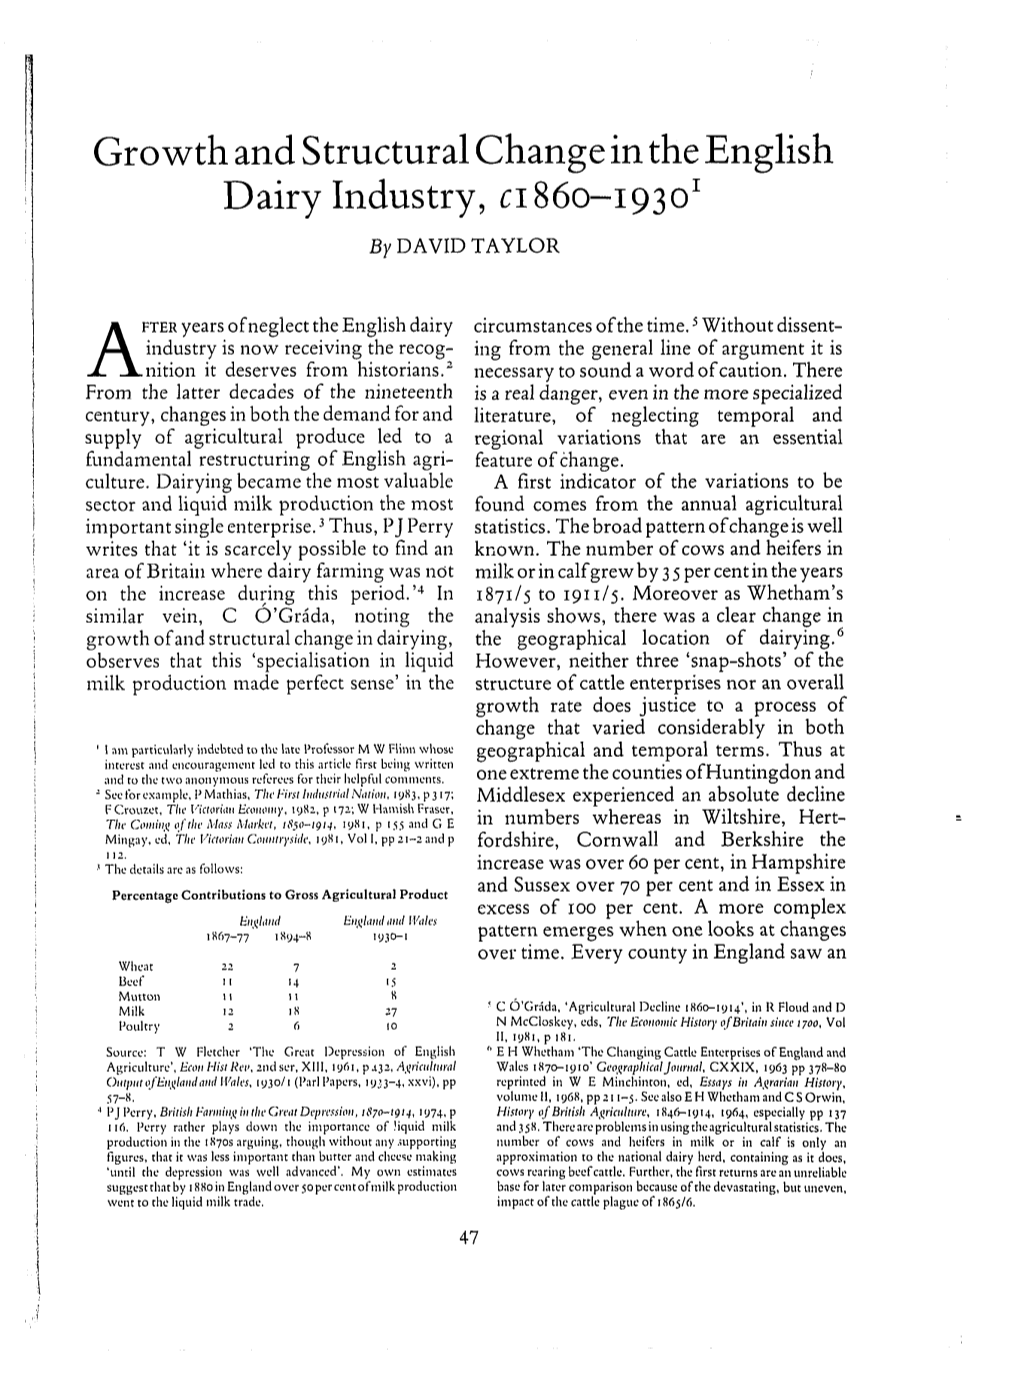 Growth and Structural Change in the English Dairy Industry, C1860-1930